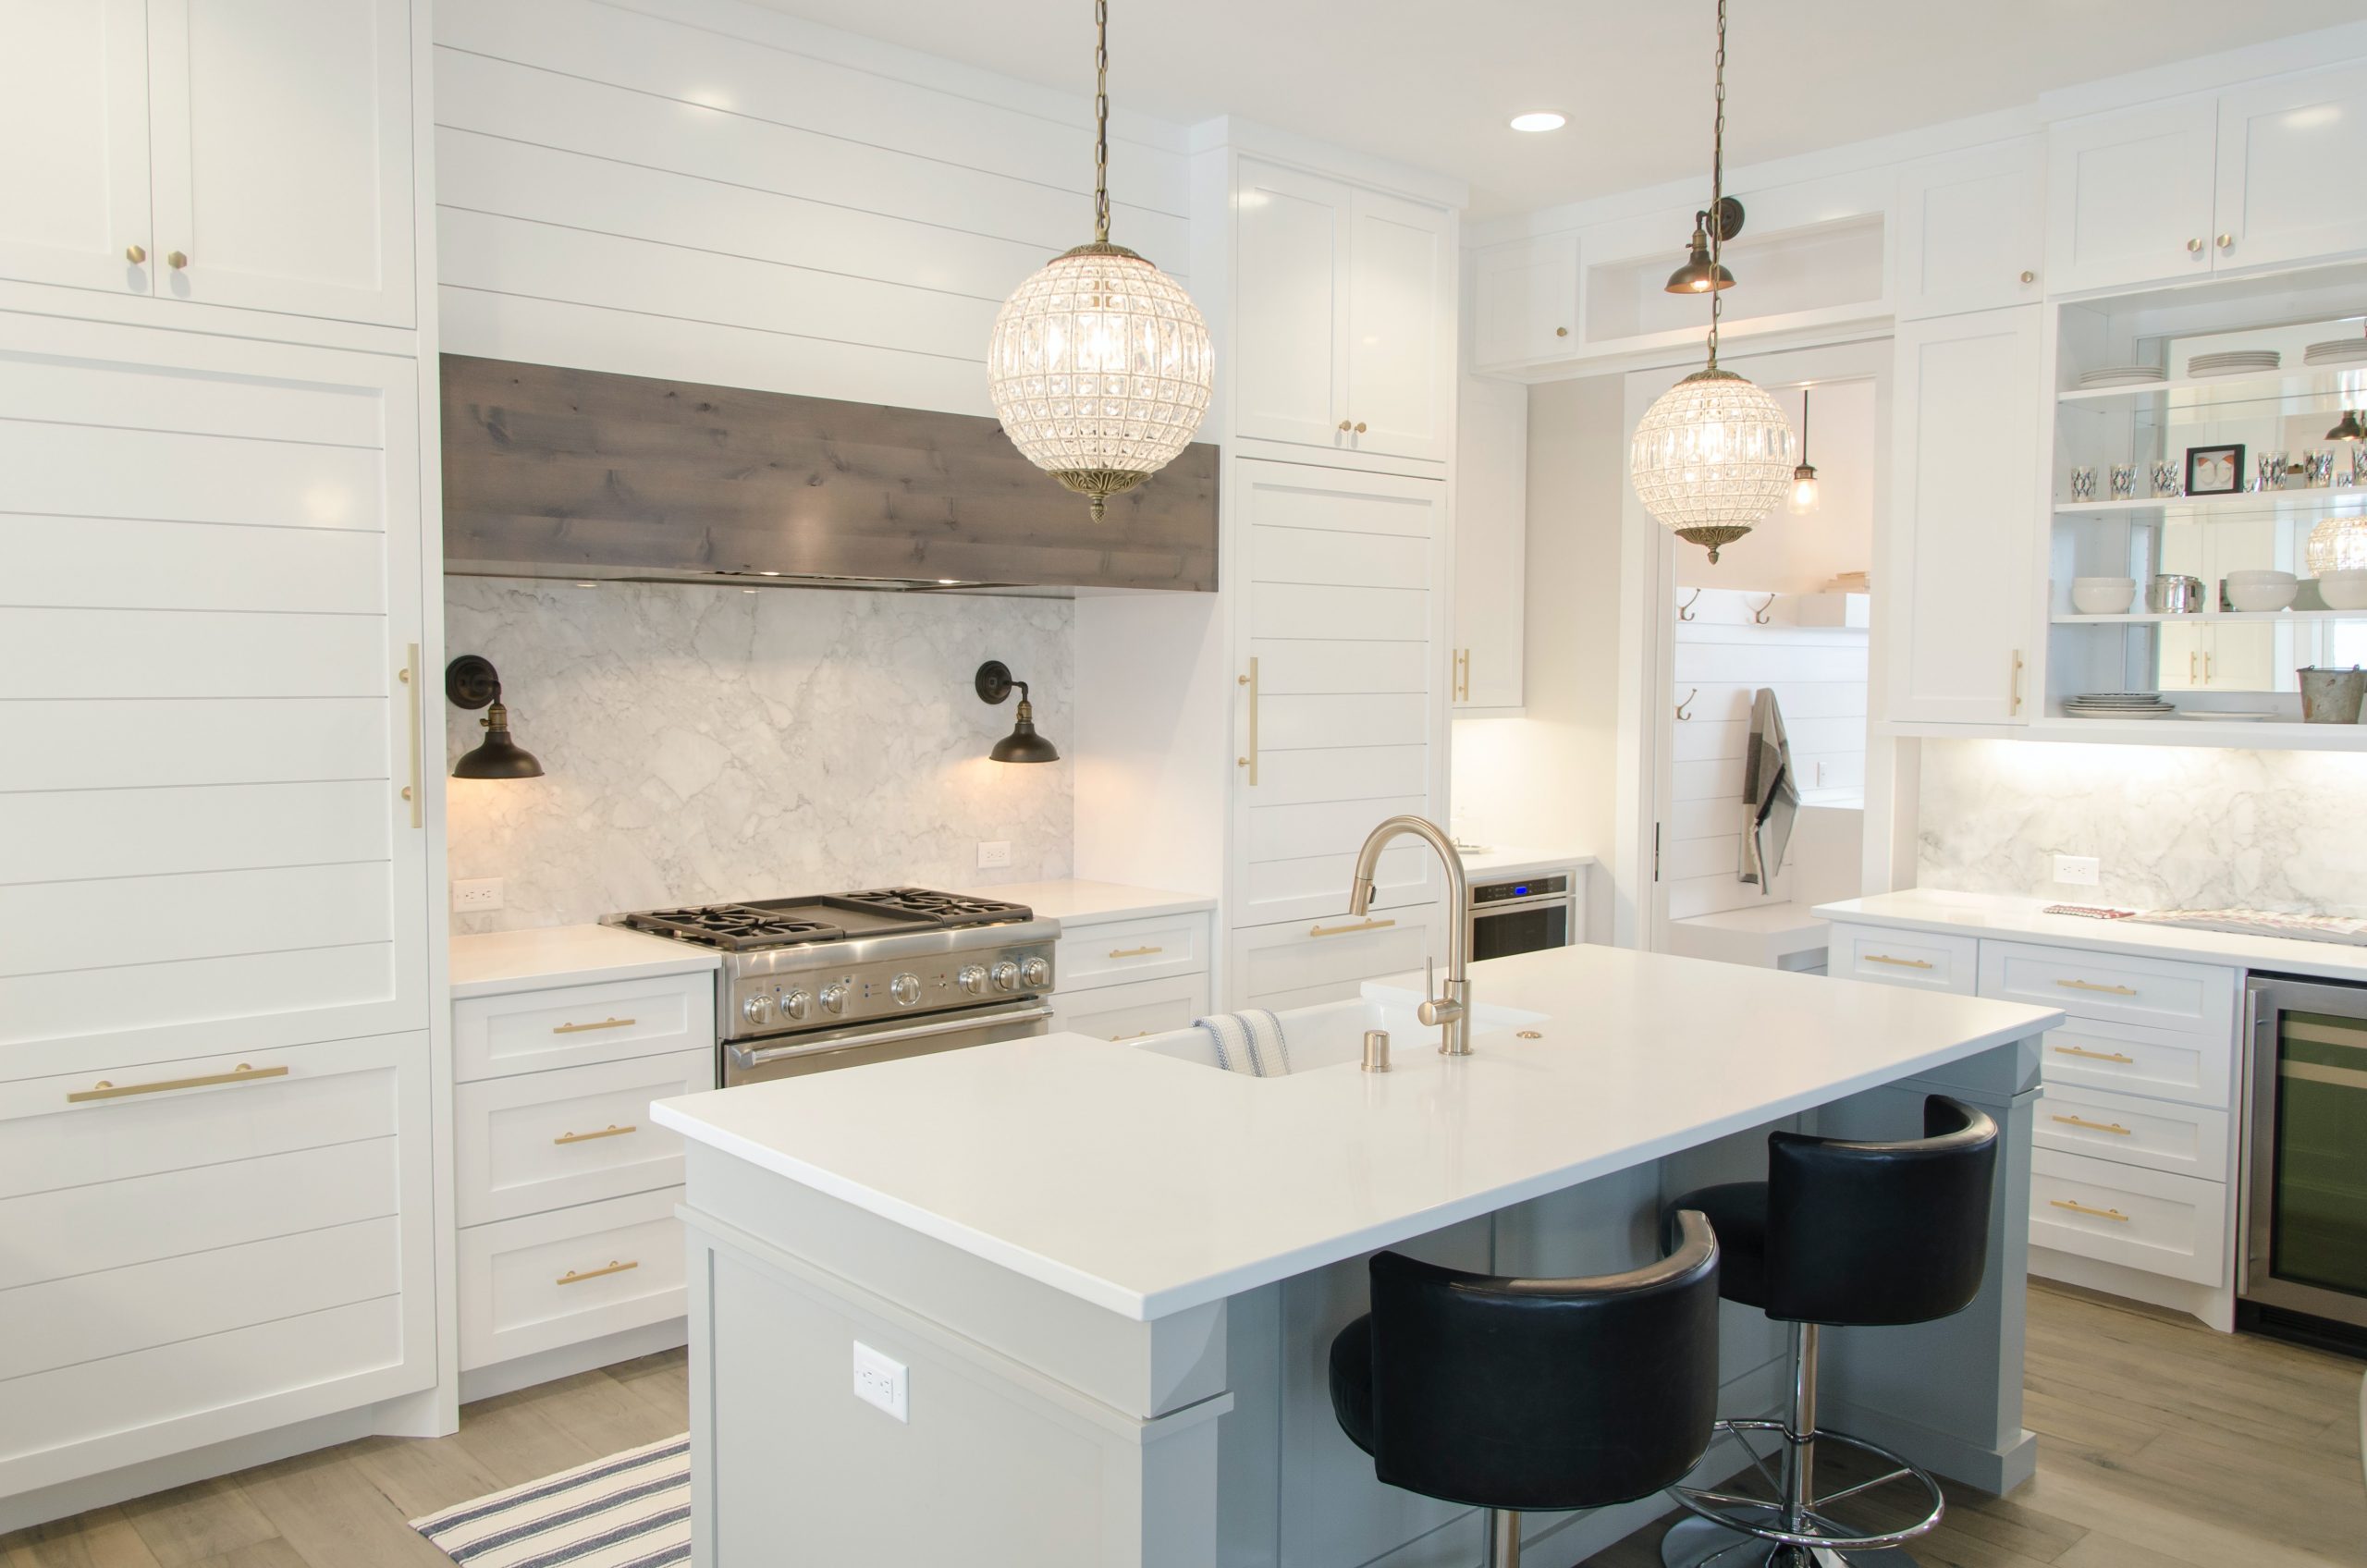 A modern kitchen designed all in white with black breakfast bar stools.